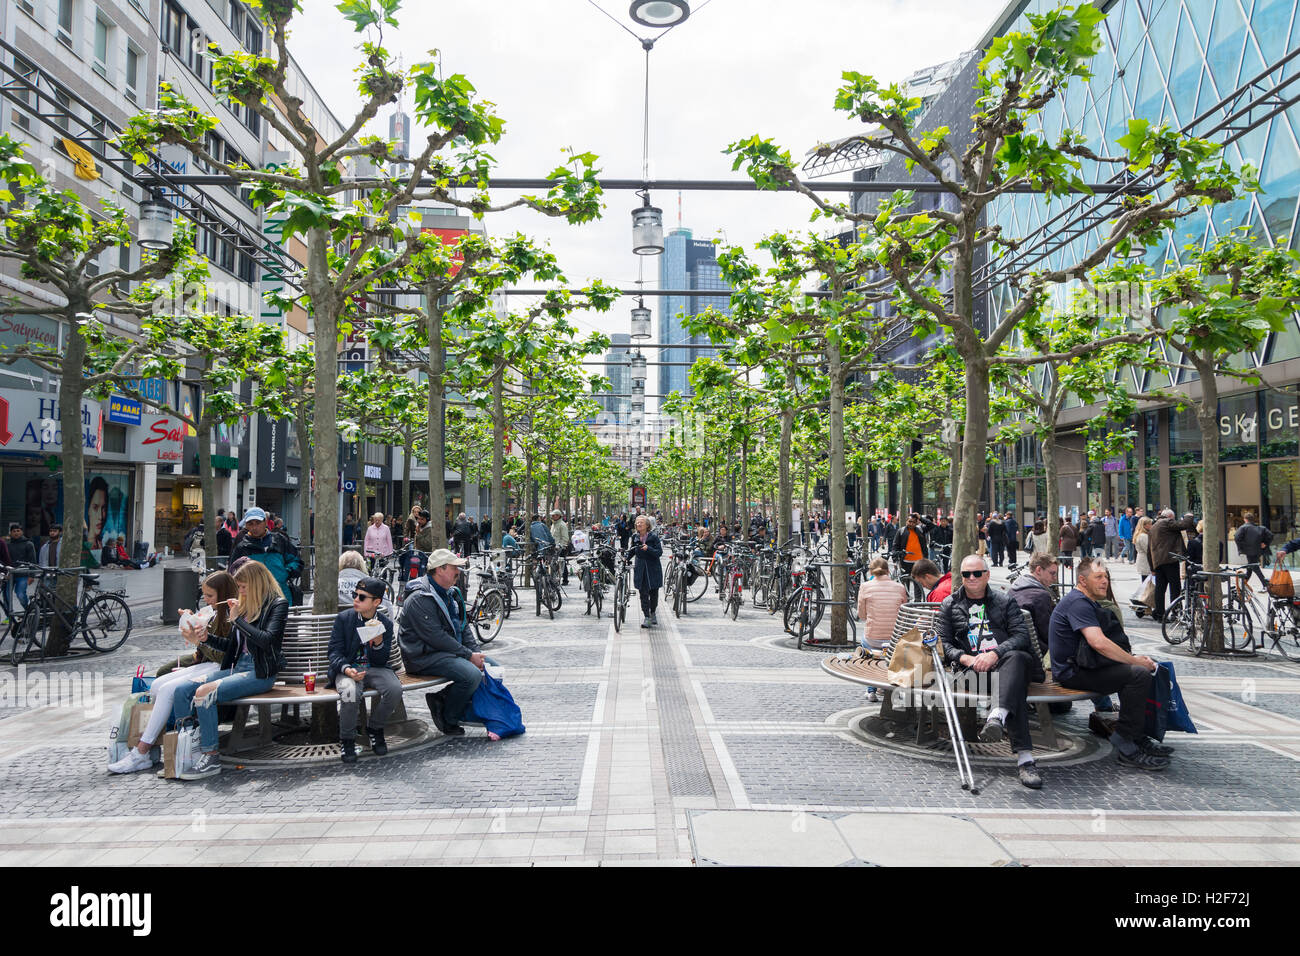 FRANKFURT AM MAIN, GERMANY - MAY 18, 2016: people walk along the Zeil in midday in Frankfurt, Germany. Since the 19th century it Stock Photo